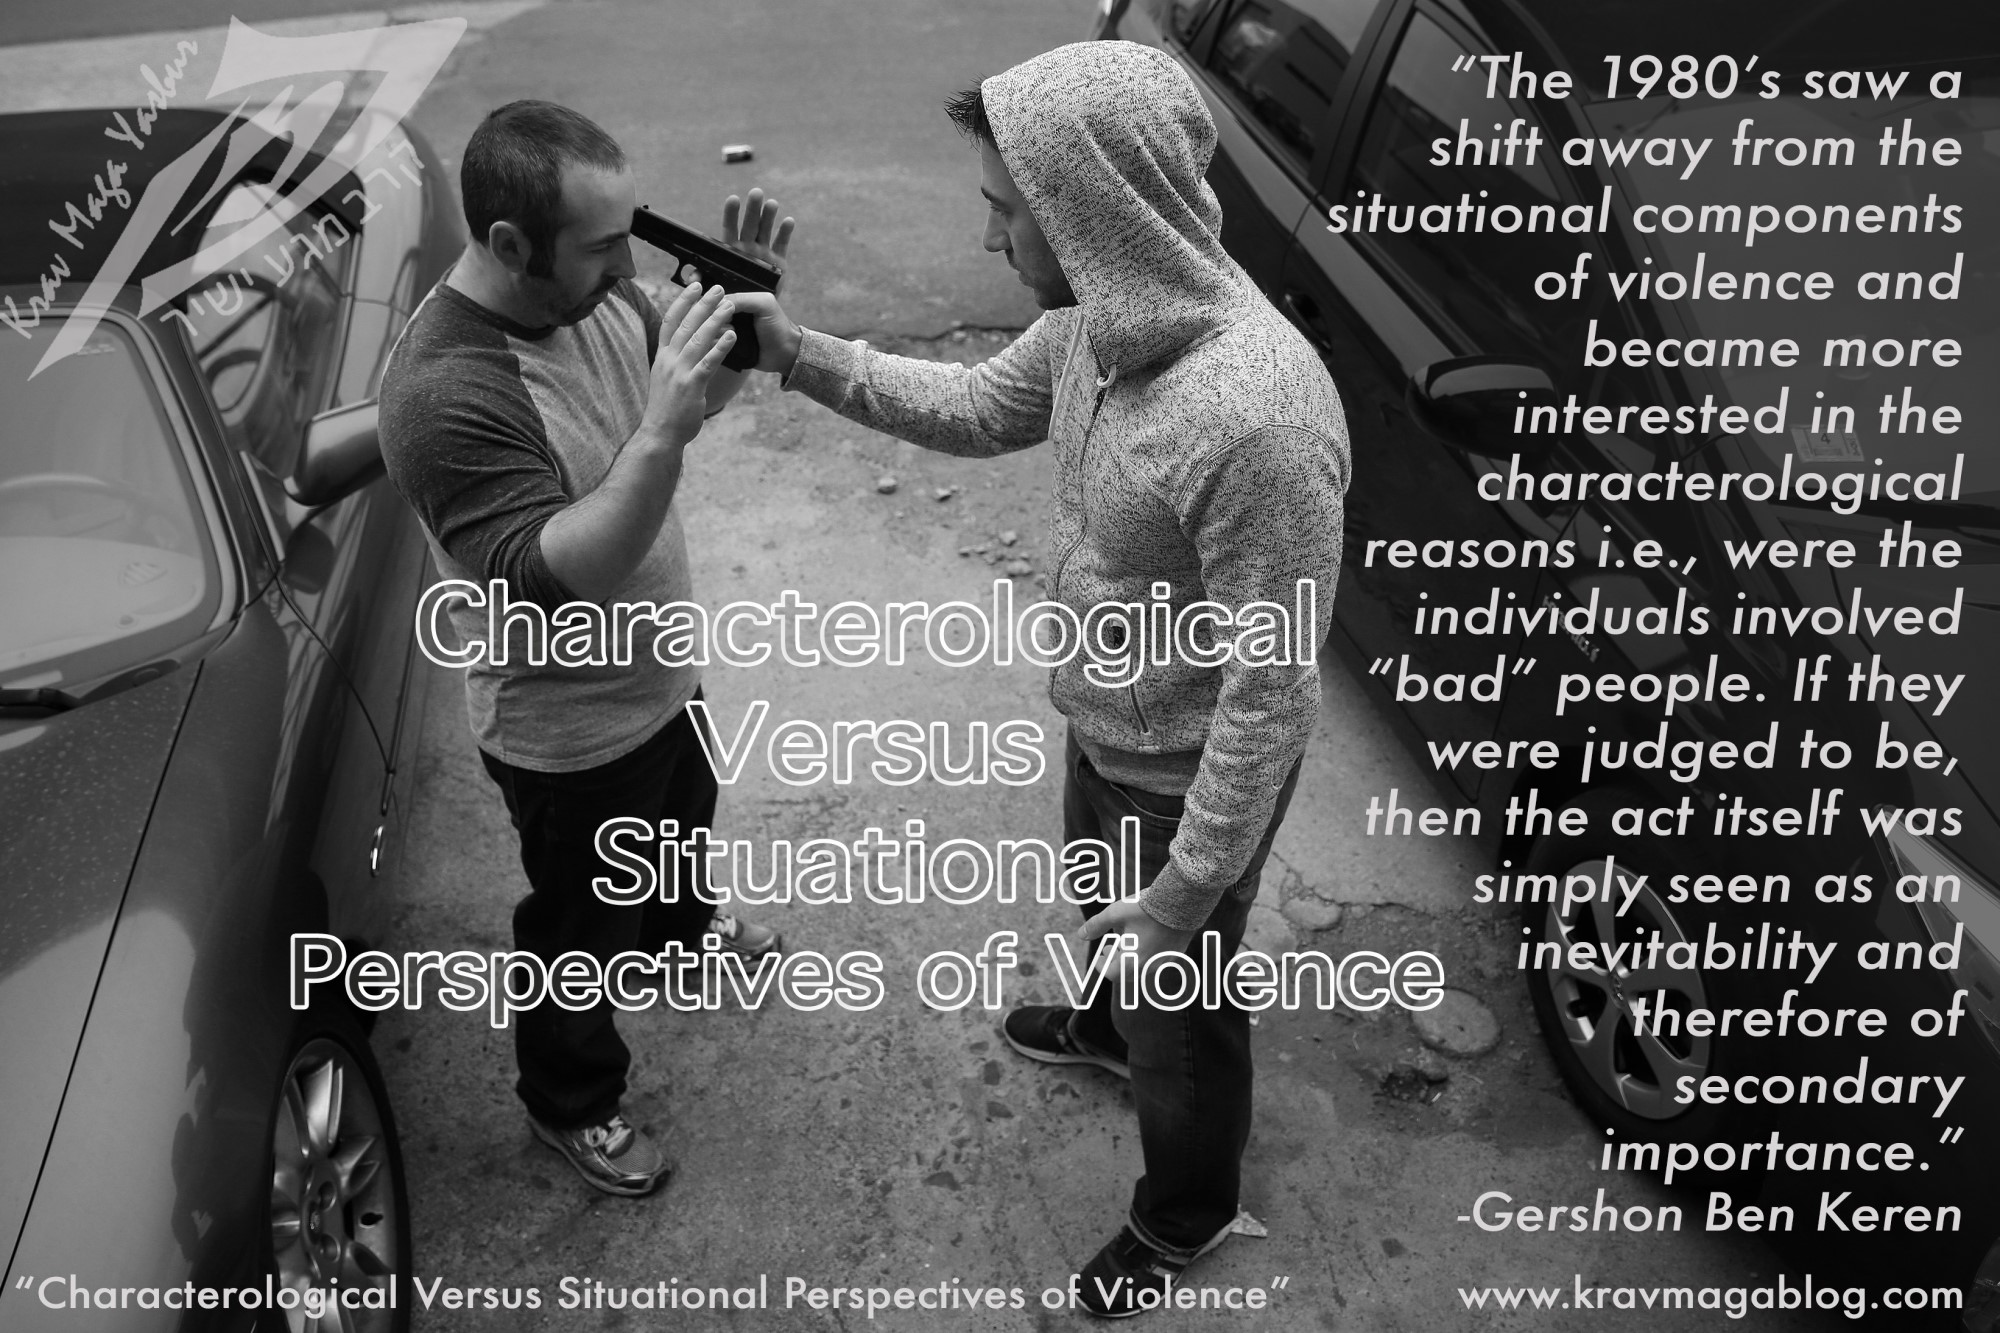 Blog About Characterological Versus Situational Perspectives of Violence